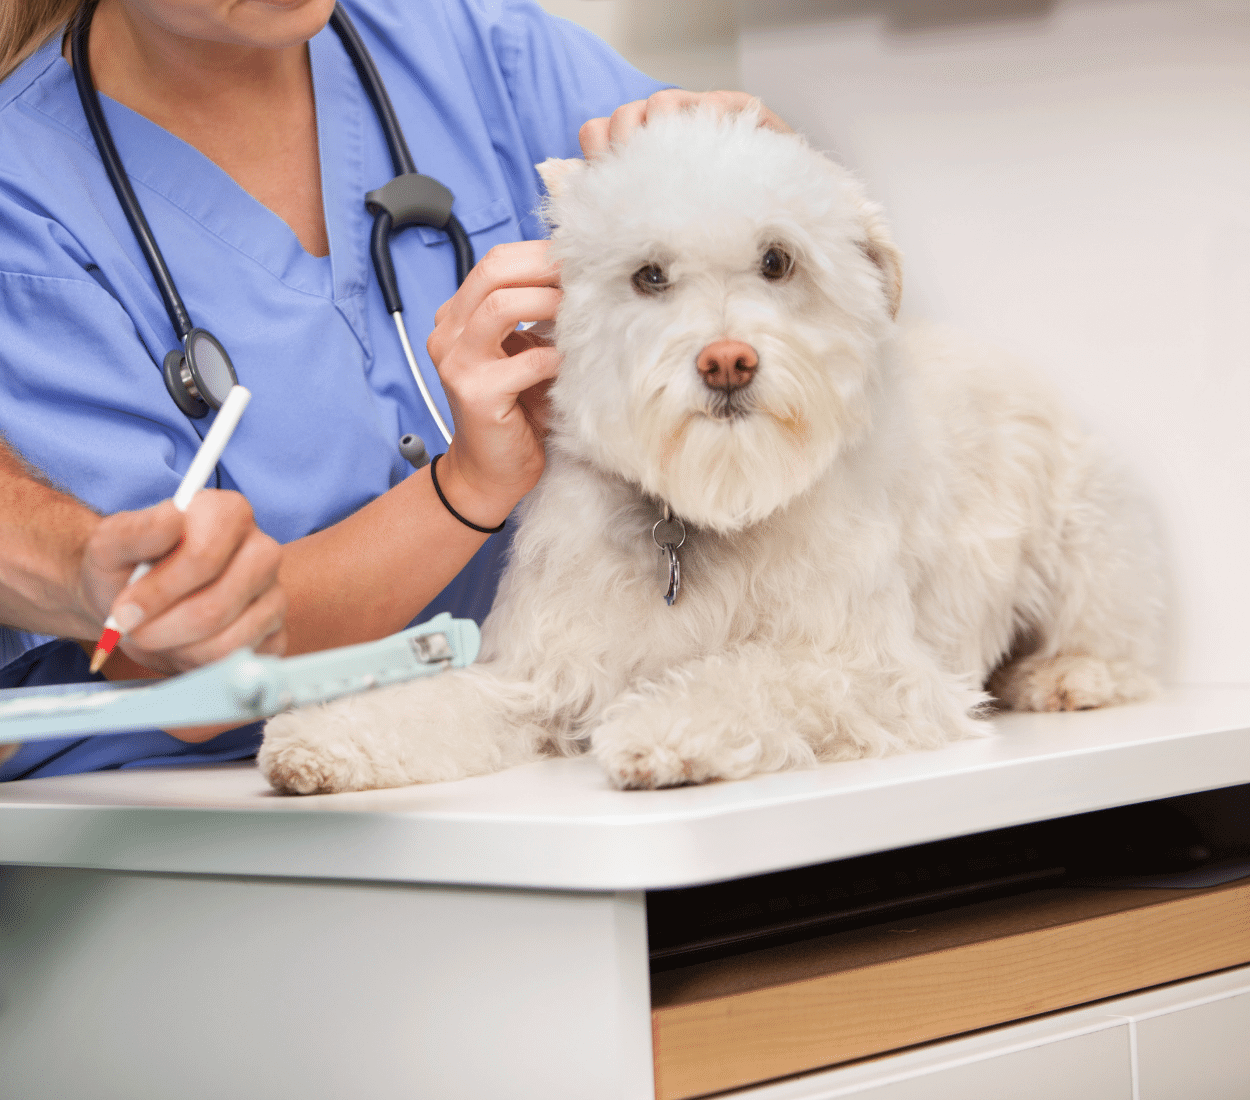 Vet and Assistant Examining Dog